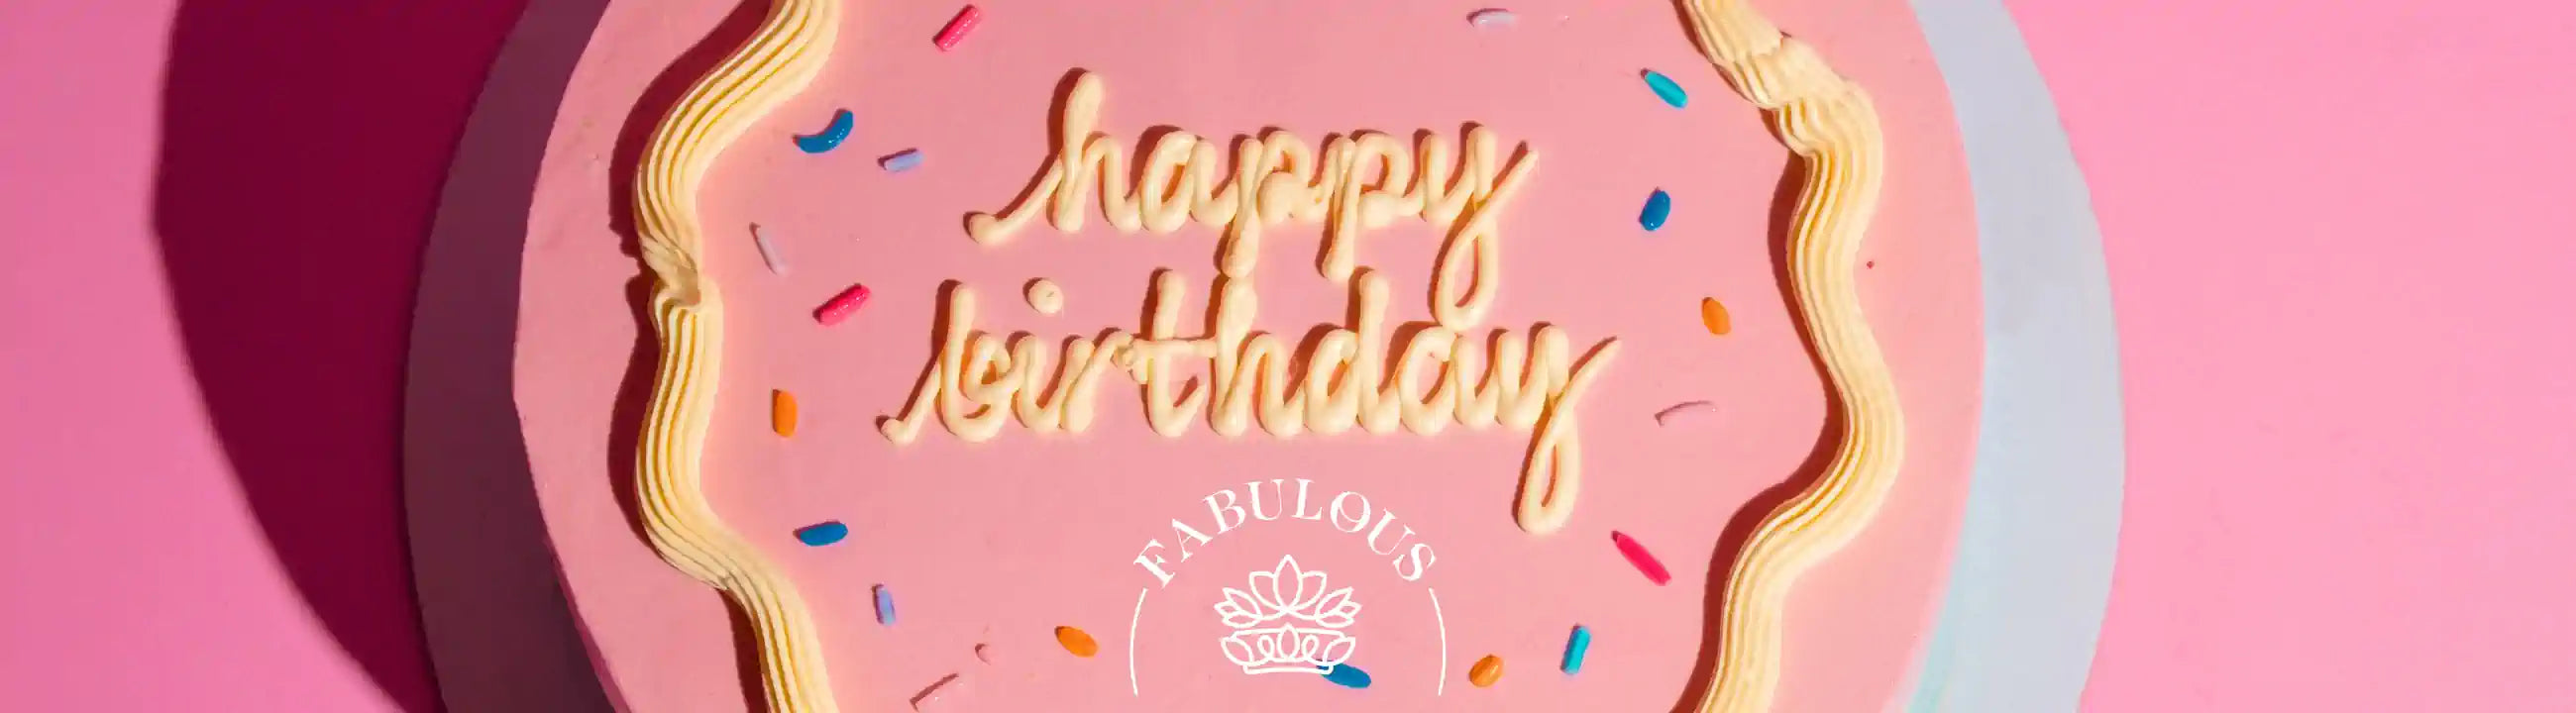 A pink birthday cake with the words "happy birthday" written in white icing, decorated with colorful sprinkles. Fabulous Flowers and Gifts